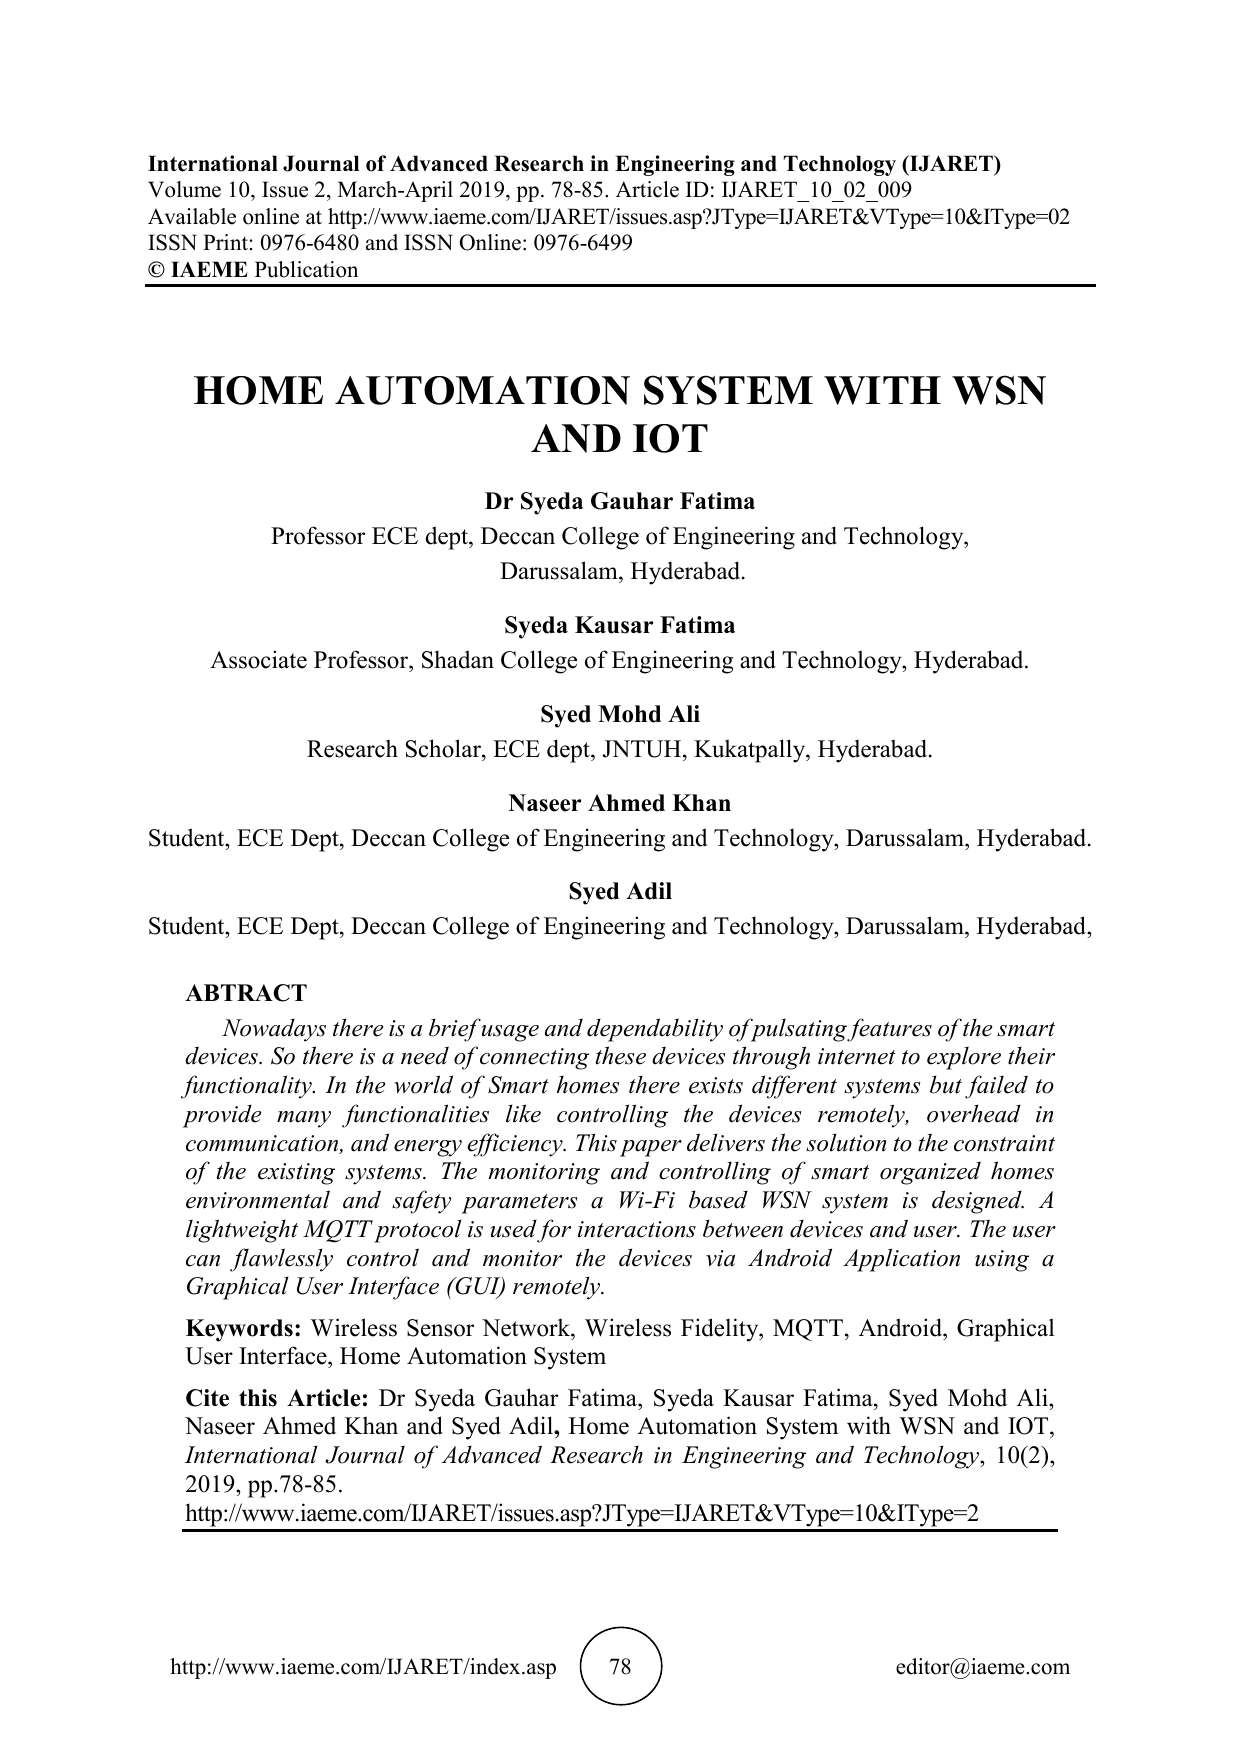 automation research papers pdf